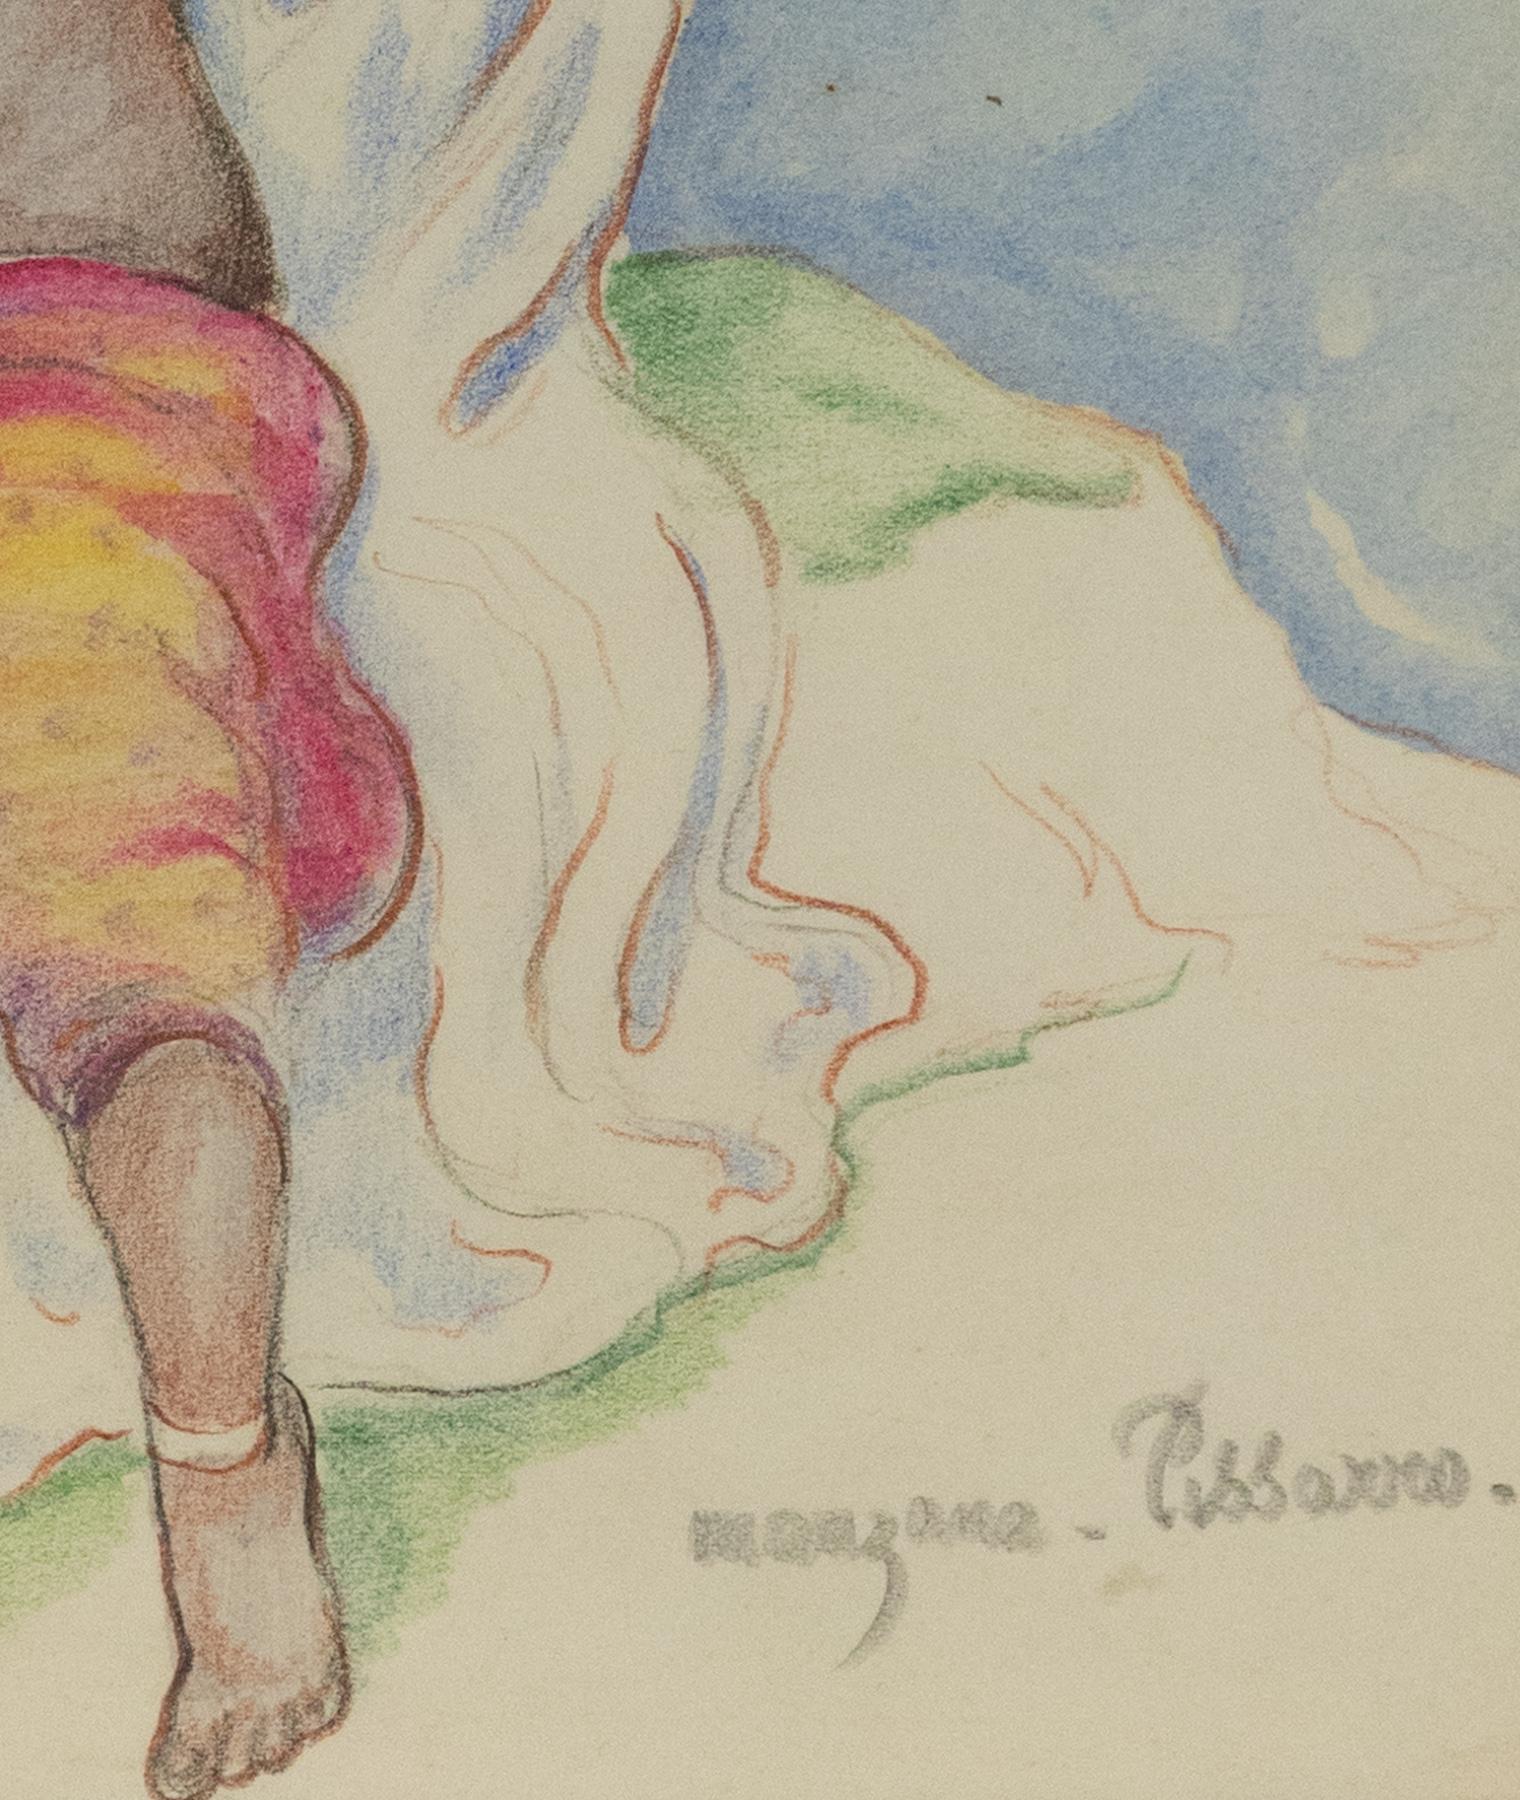 *UK BUYERS WILL PAY AN ADDITIONAL 20% VAT ON TOP OF THE ABOVE PRICE

Moroccan Dancer by Georges Manzana Pissarro (1871-1961)
Watercolour, coloured crayon and pencil
26.3 x 20.2 cm ( 10 ⅜ x 8 inches) 
Signed lower right, Manzana - Pissarro. 
Executed